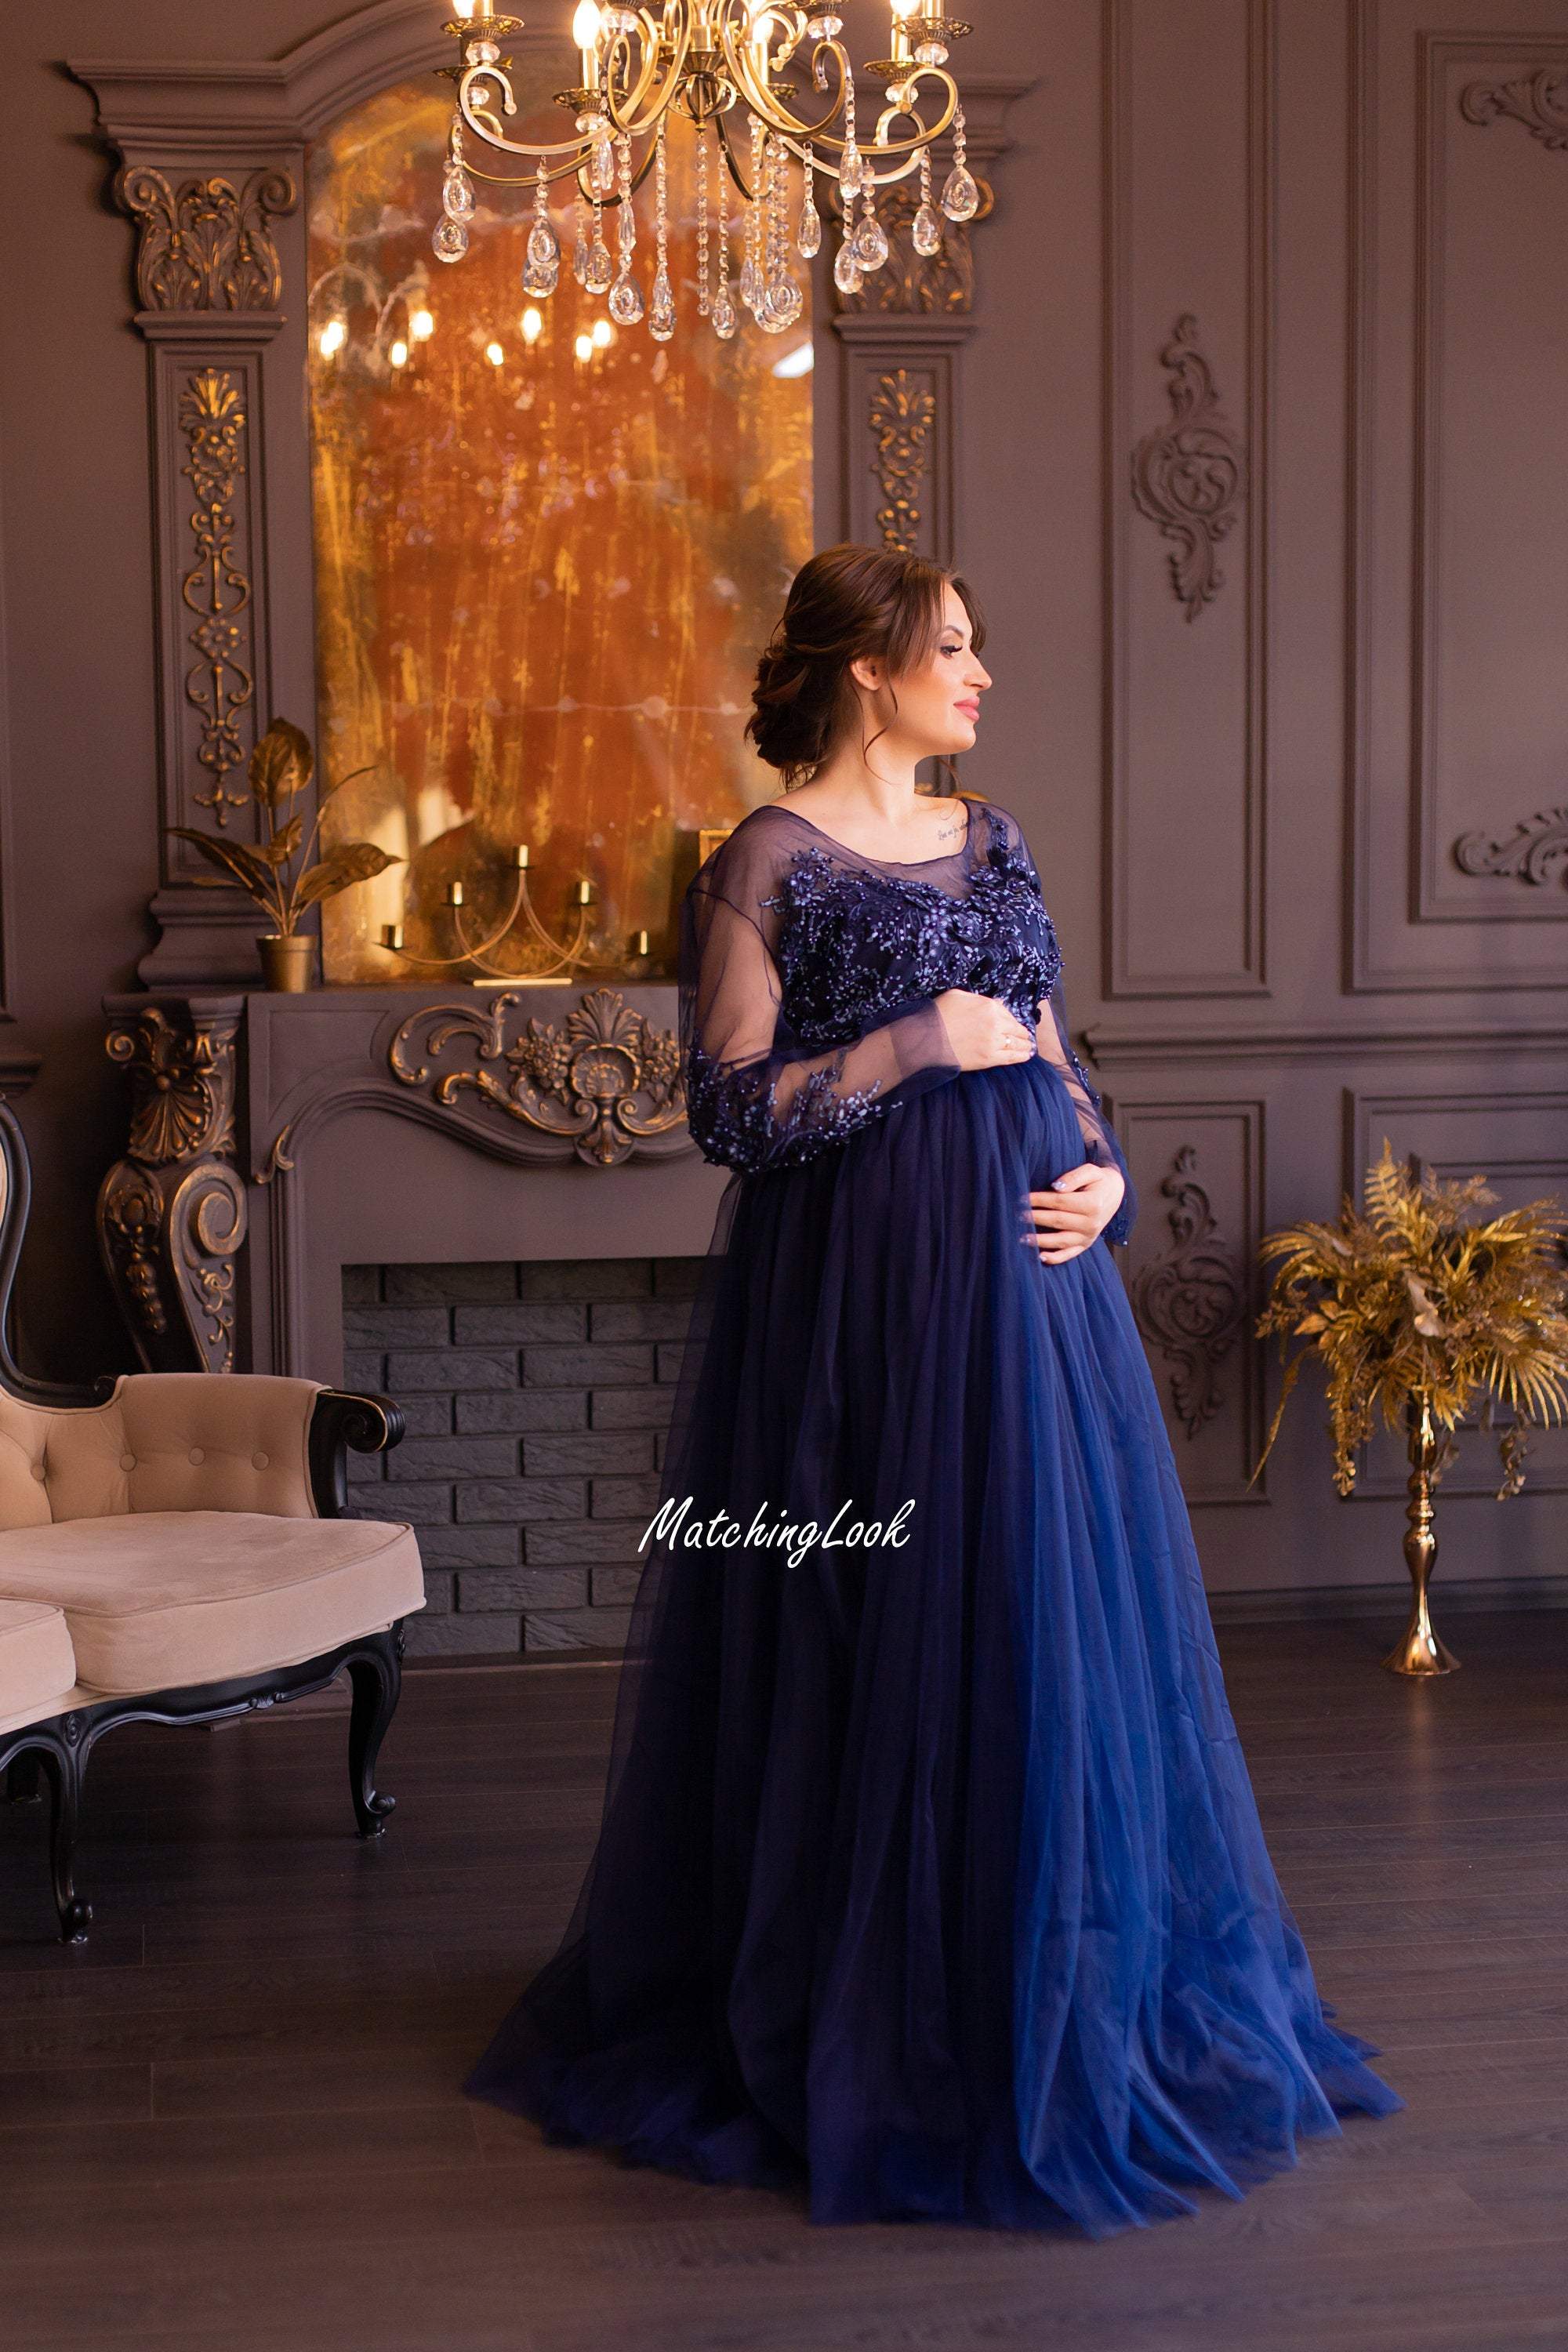 navy blue maternity dress baby shower dress long lace dress tulle maternity dress for photoshoot pregnancy gown maternity gown ball matchinglook